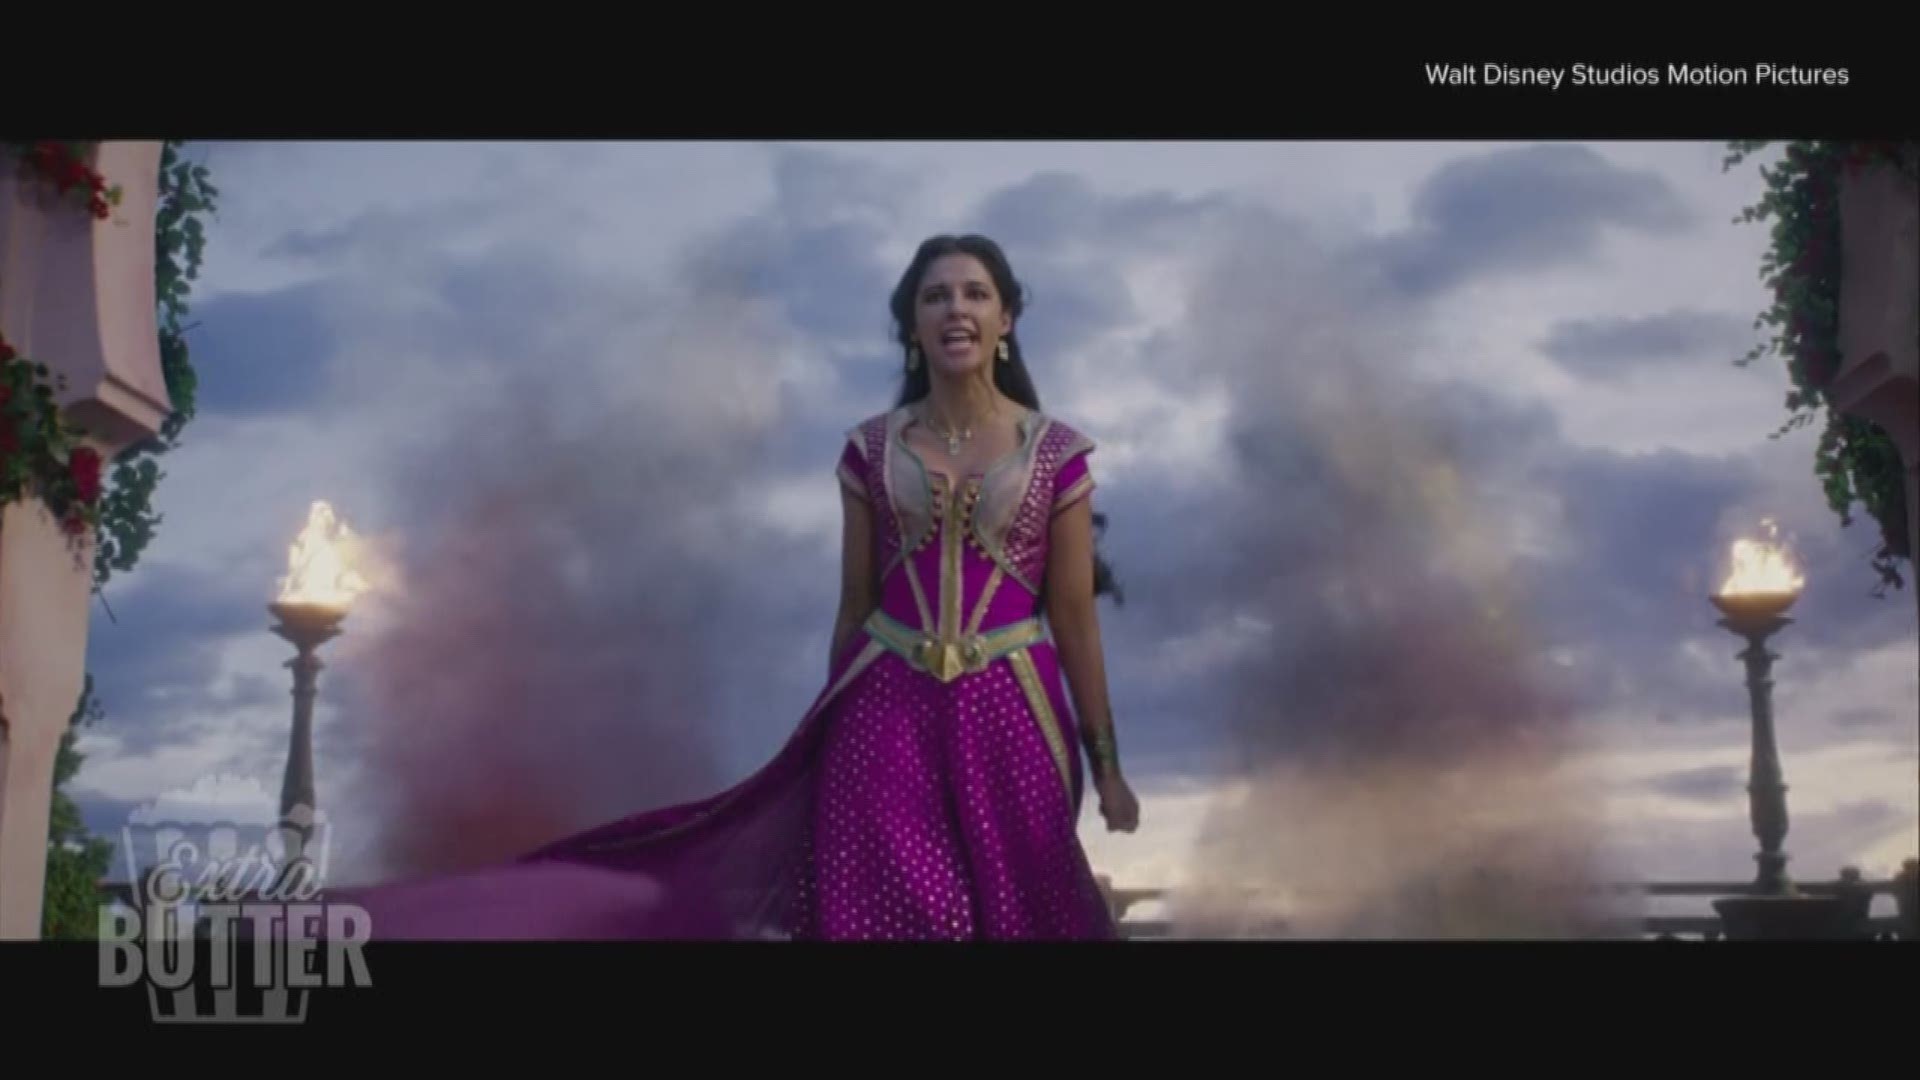 Naomi Scott redefines what it means to be a Disney Princess. Naomi stars as Jasmine in the new live-action ' Aladdin.' She tells Mark S. Allen about her song 'Speechless.'